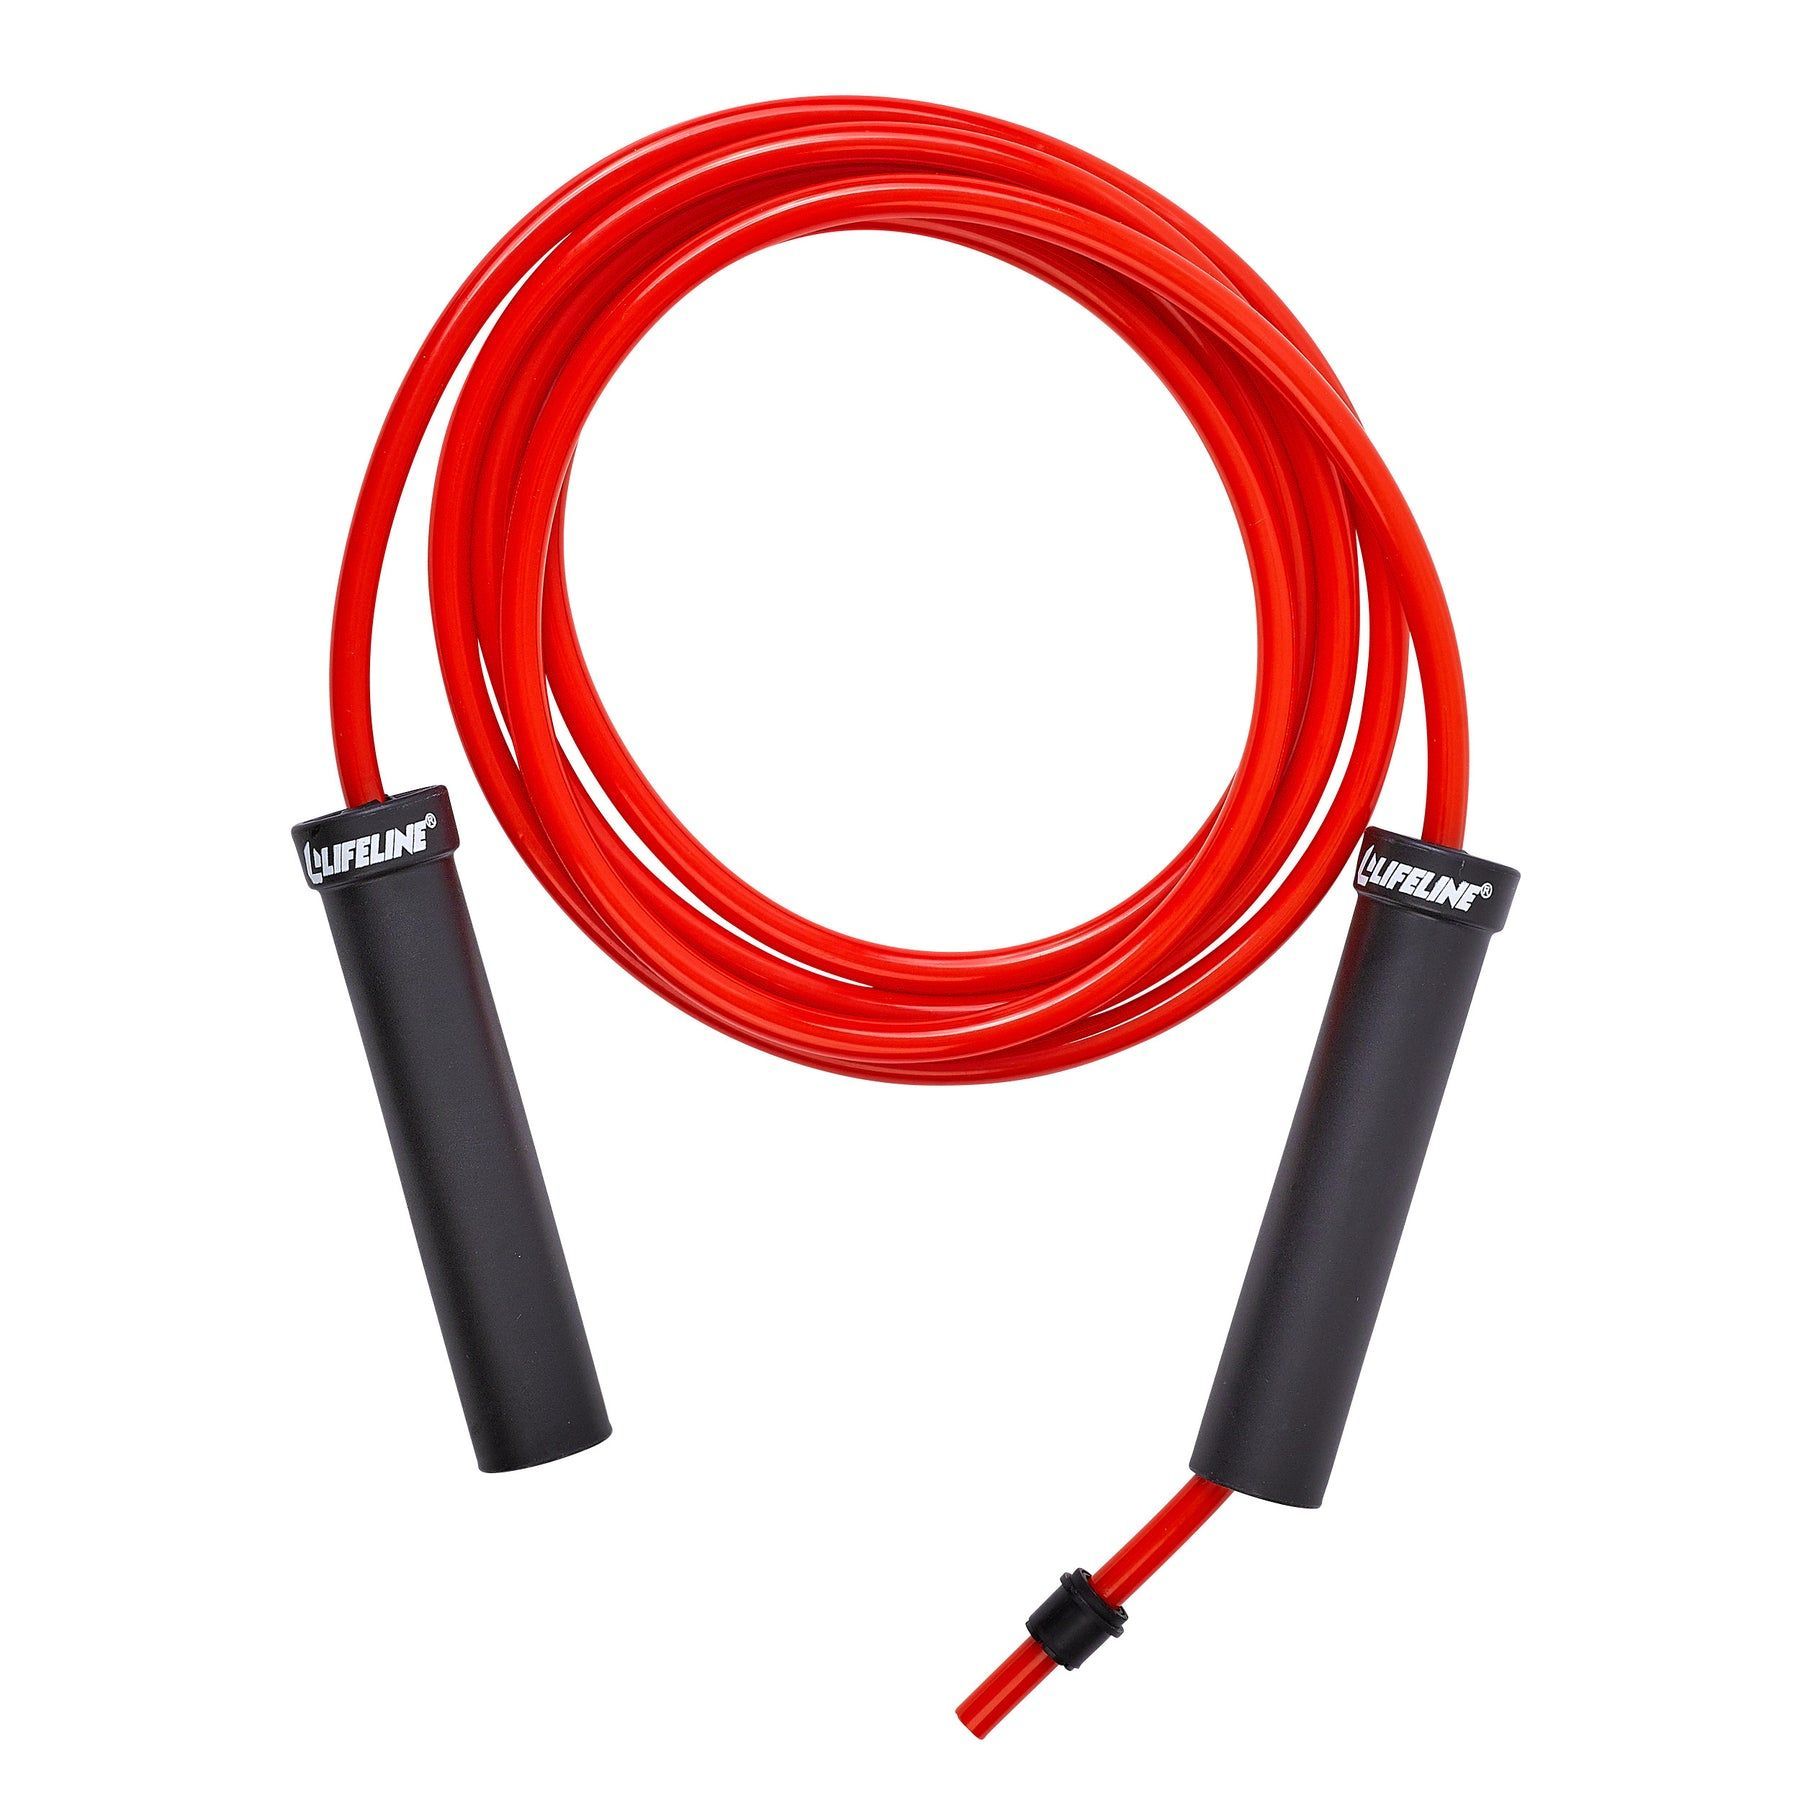 Survival and Cross Jump Rope for sale online 